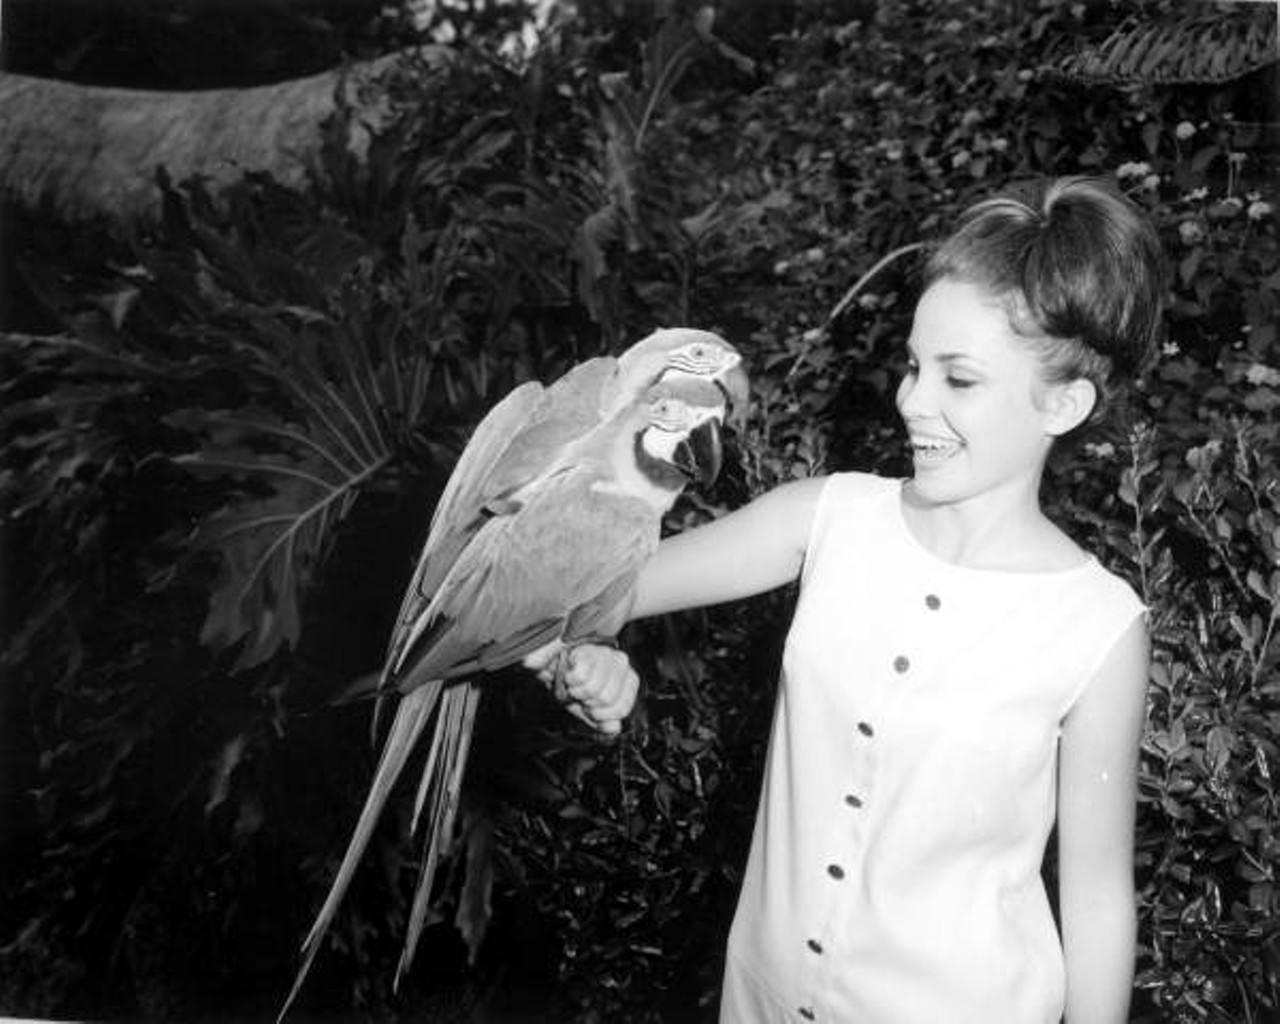 Woman with parrots at Busch Gardens. 1965.